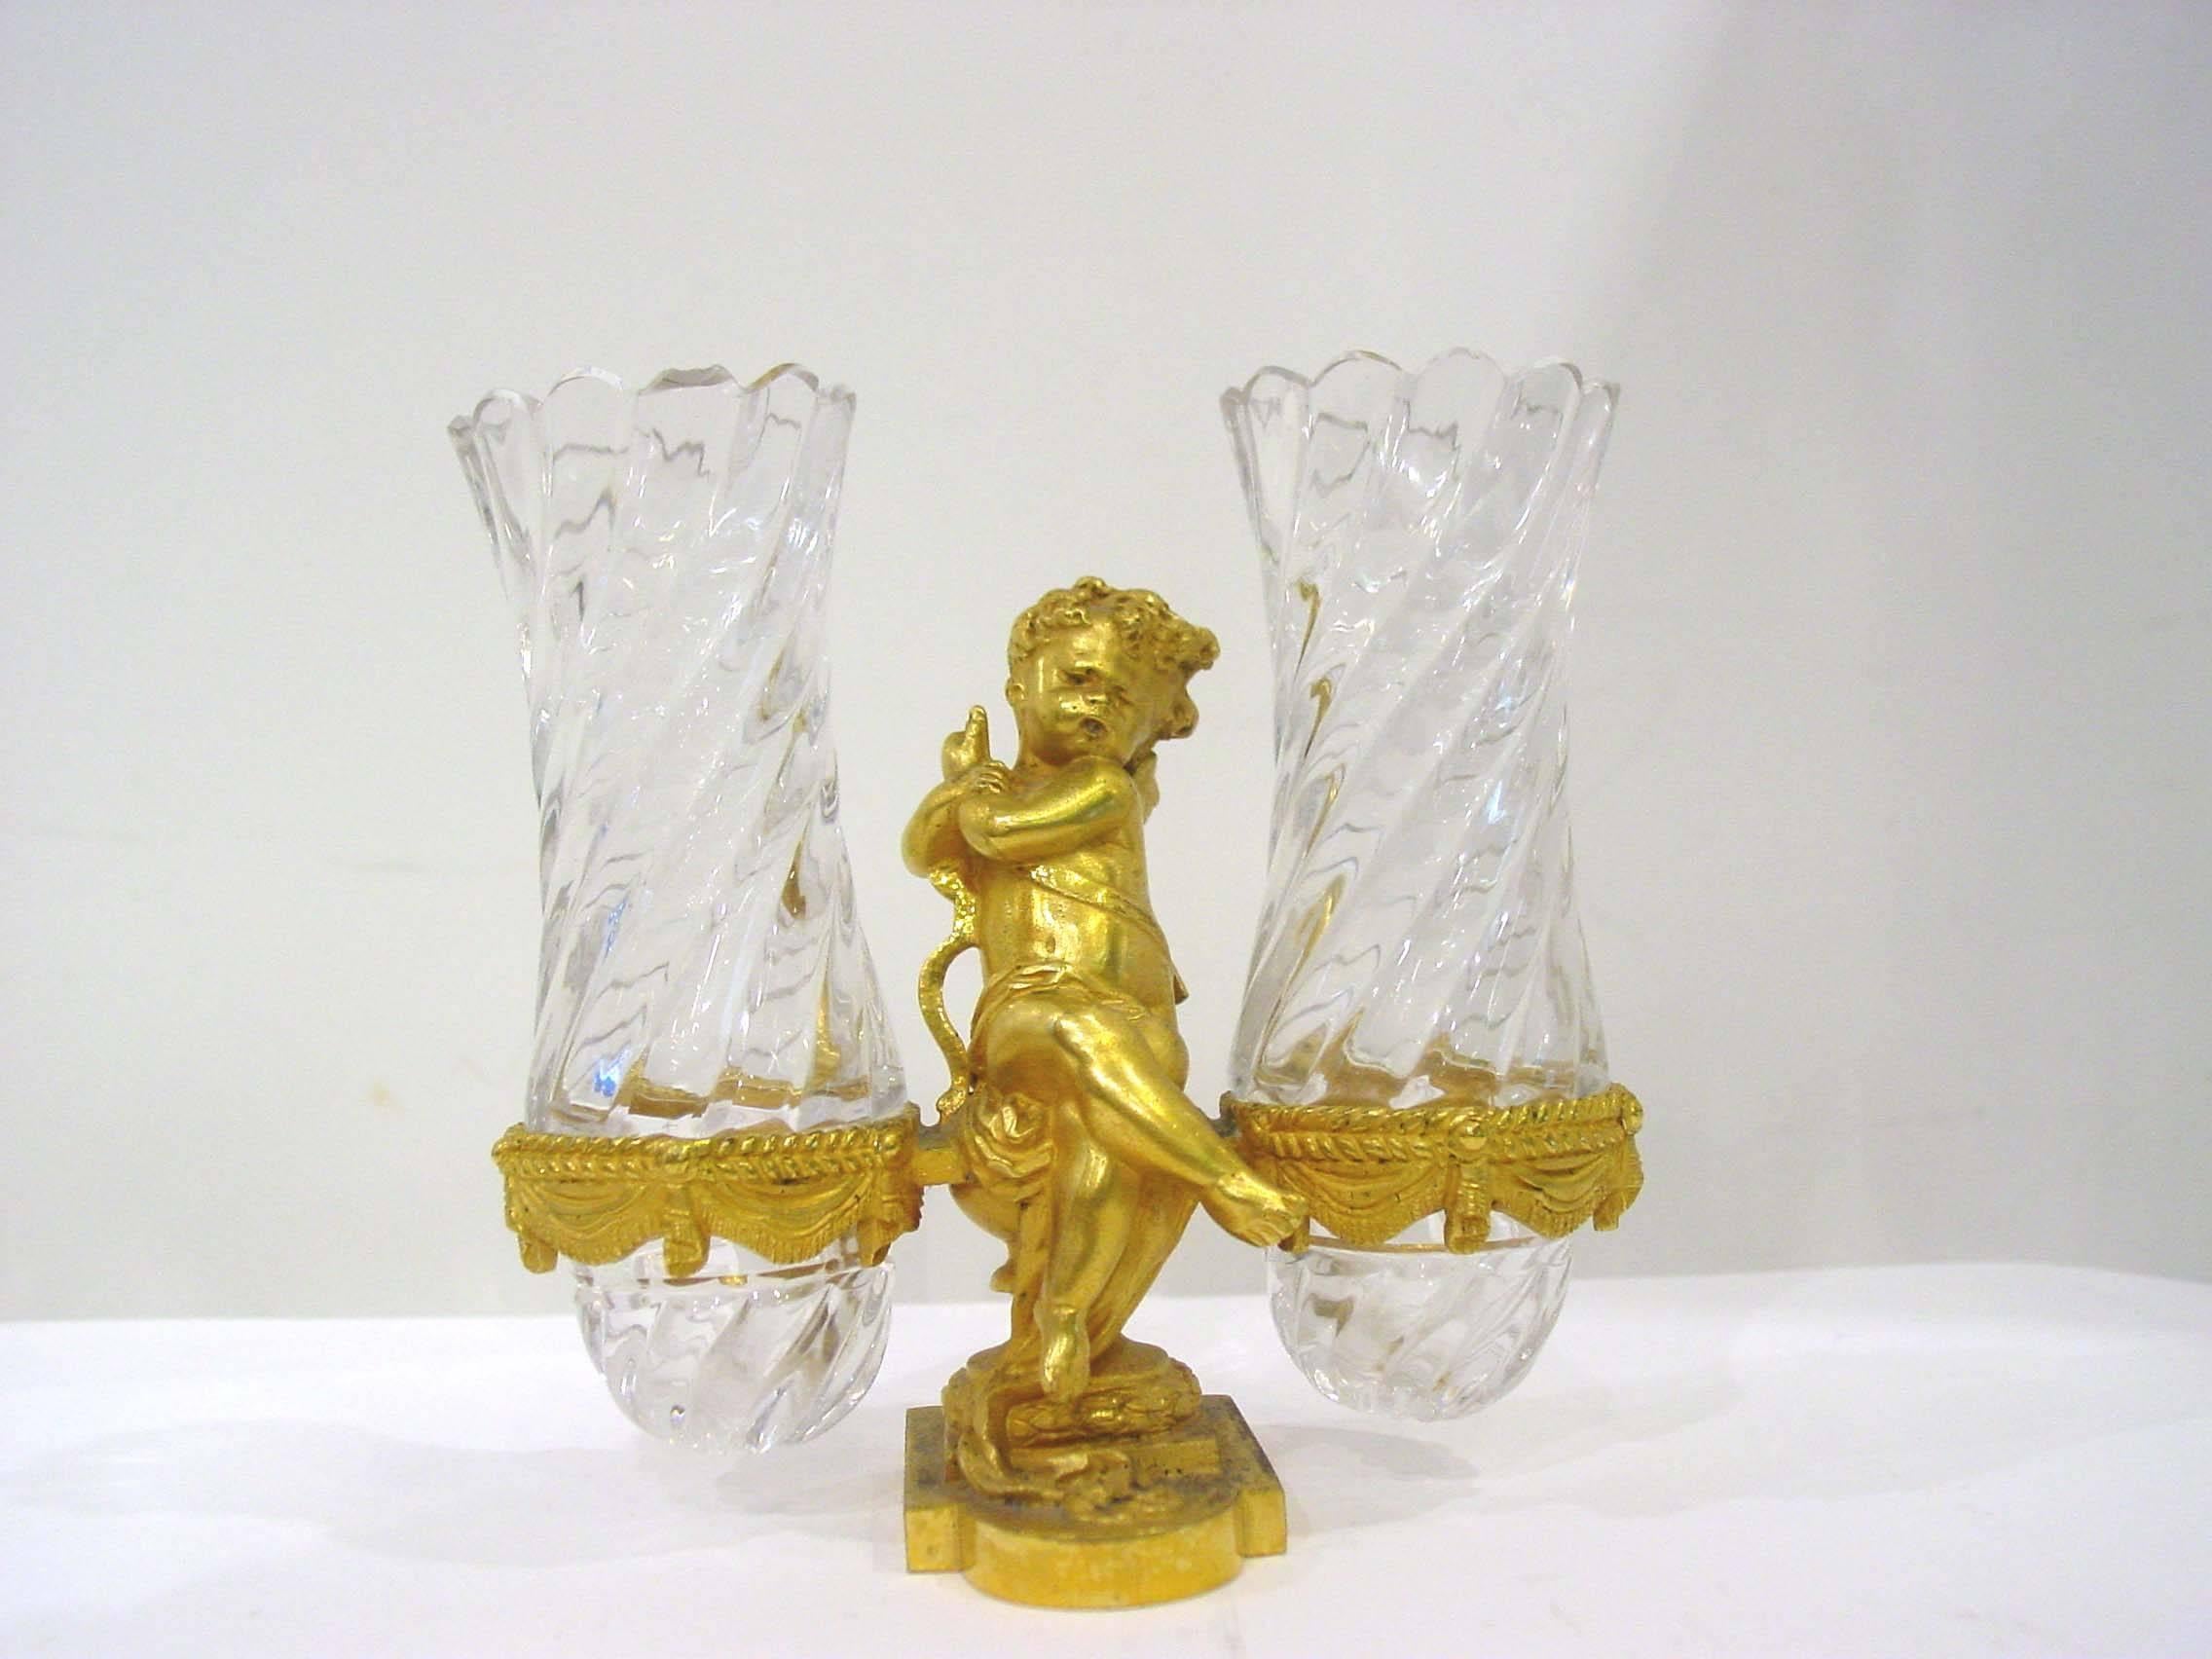 French Maison Baccarat Gilt Bronze and Crystal Salt Cellars and Vase 19th Century